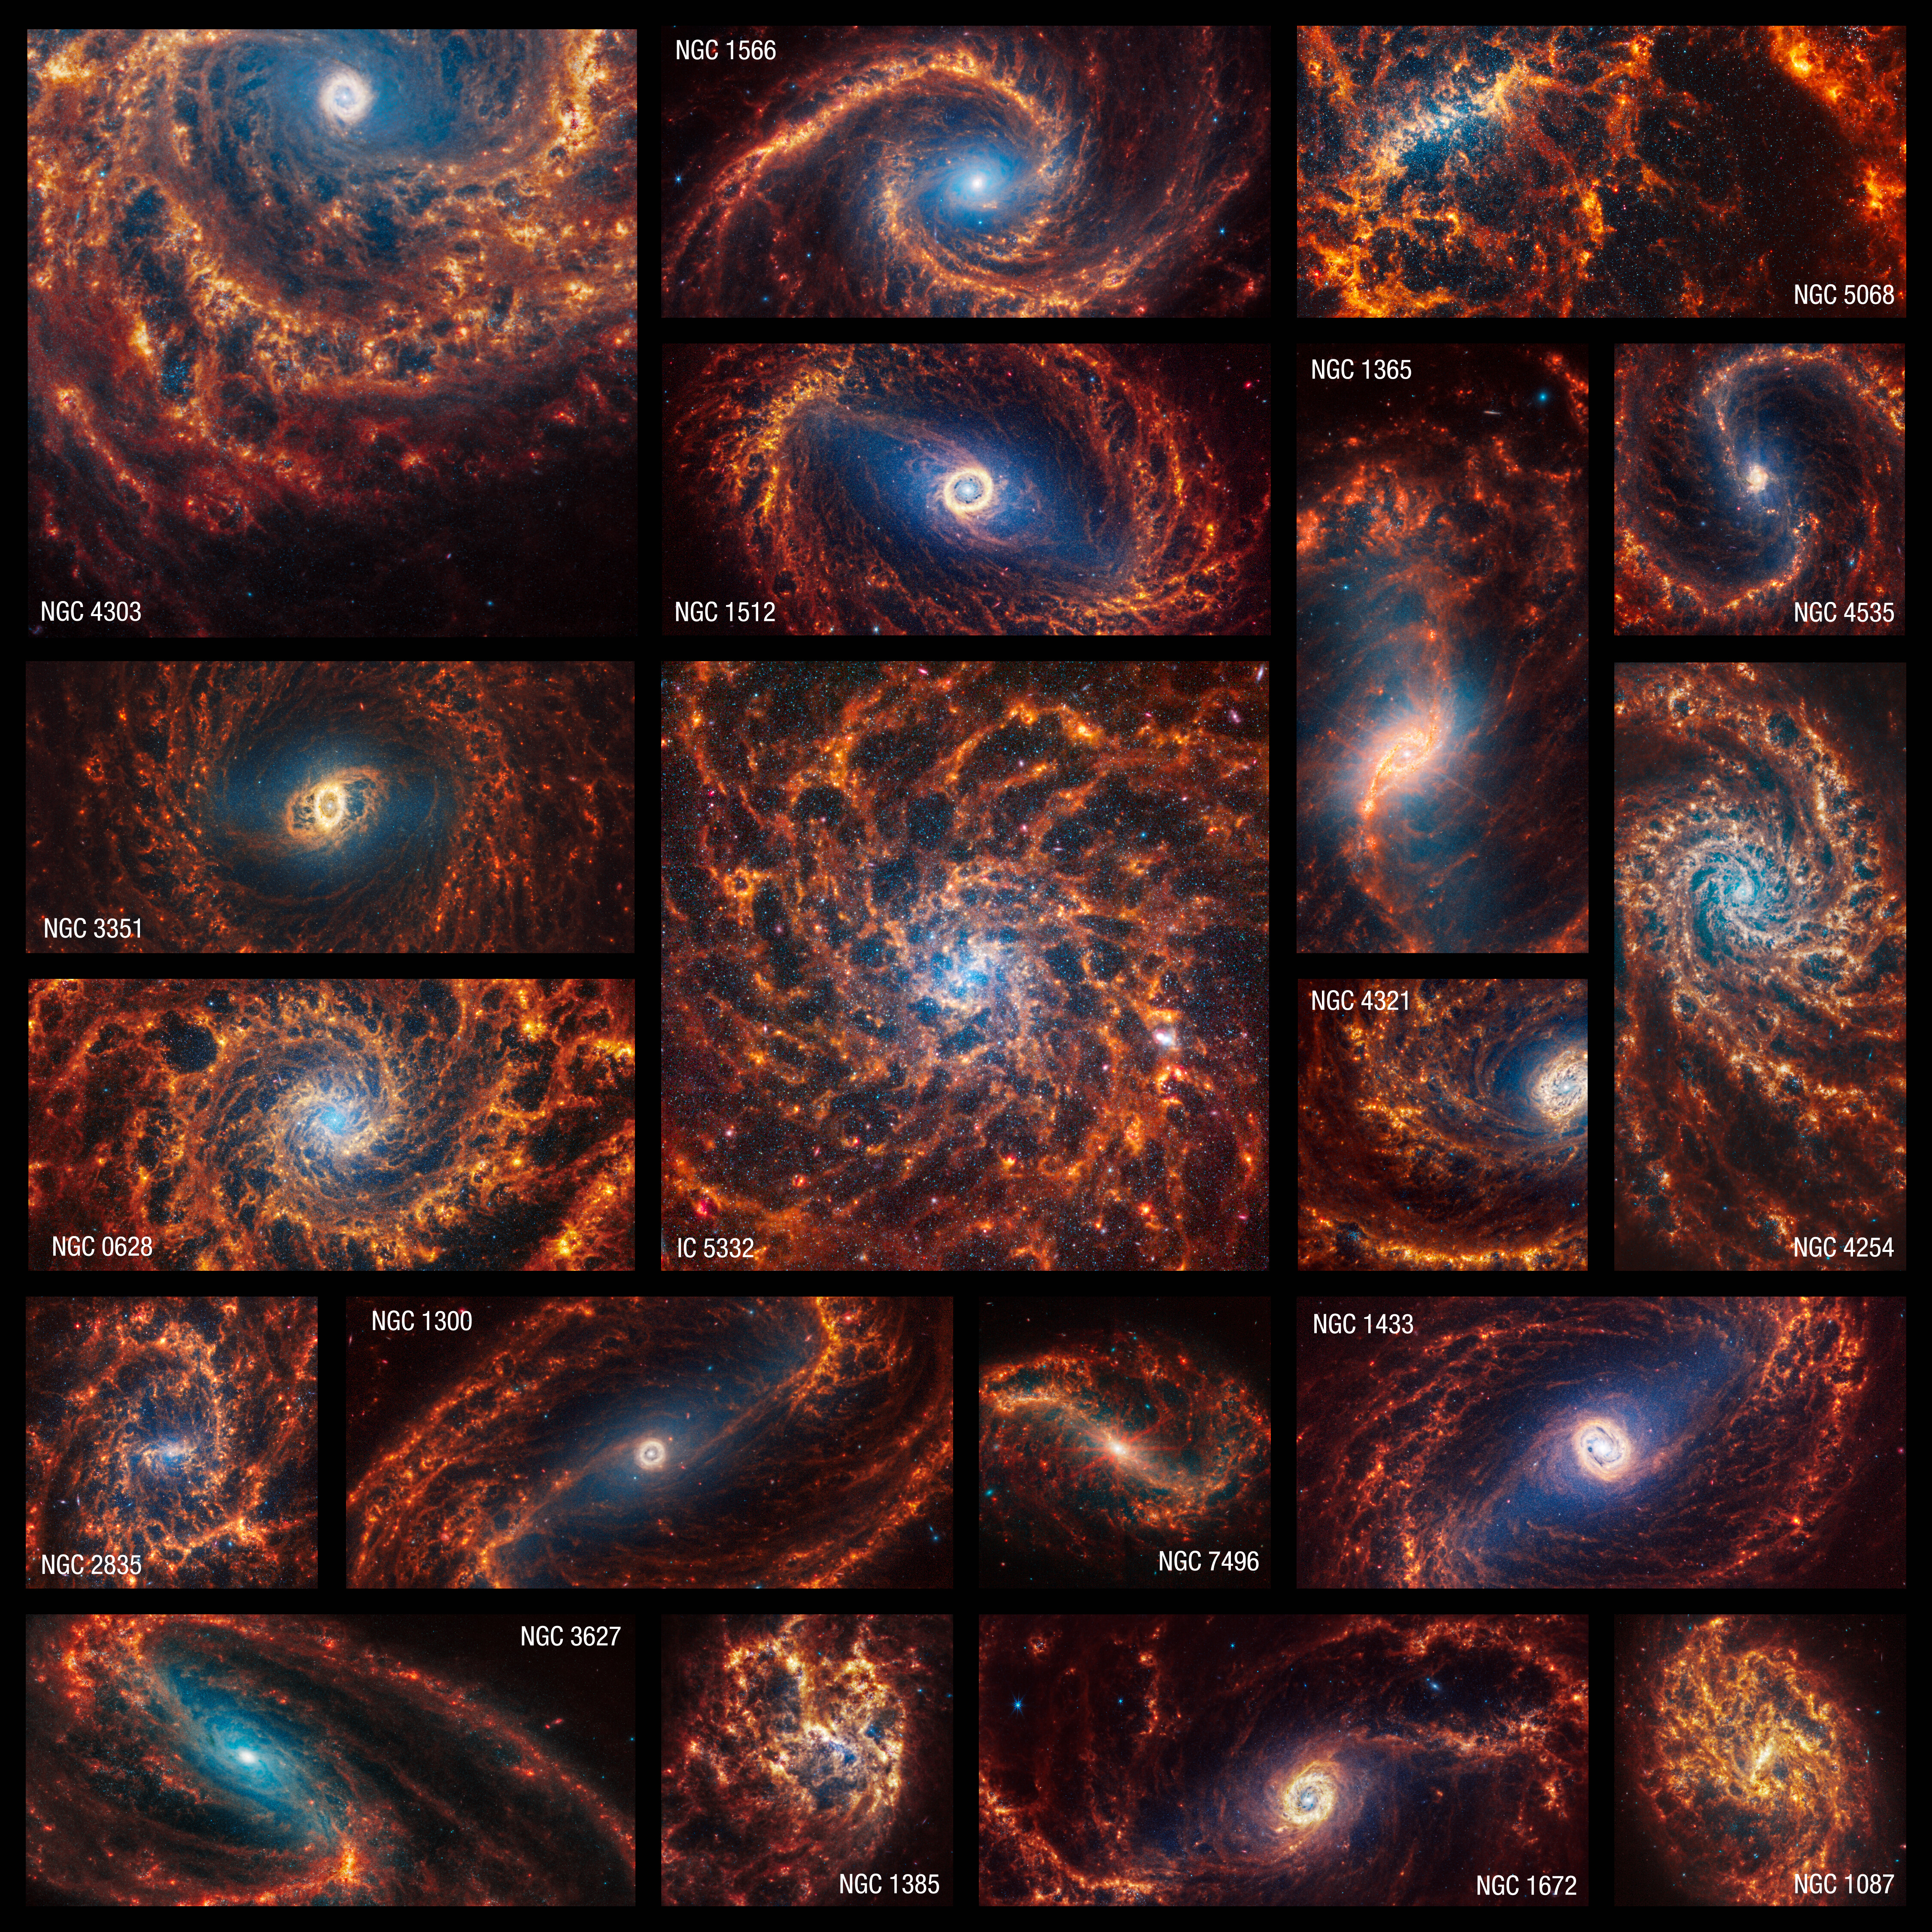 PHANGS image mosaic of 19 face-on spiral galaxies. MIRI shows the glowing dust, making it look as though the galaxies are made of filaments of swiss cheese, with many holes in each.